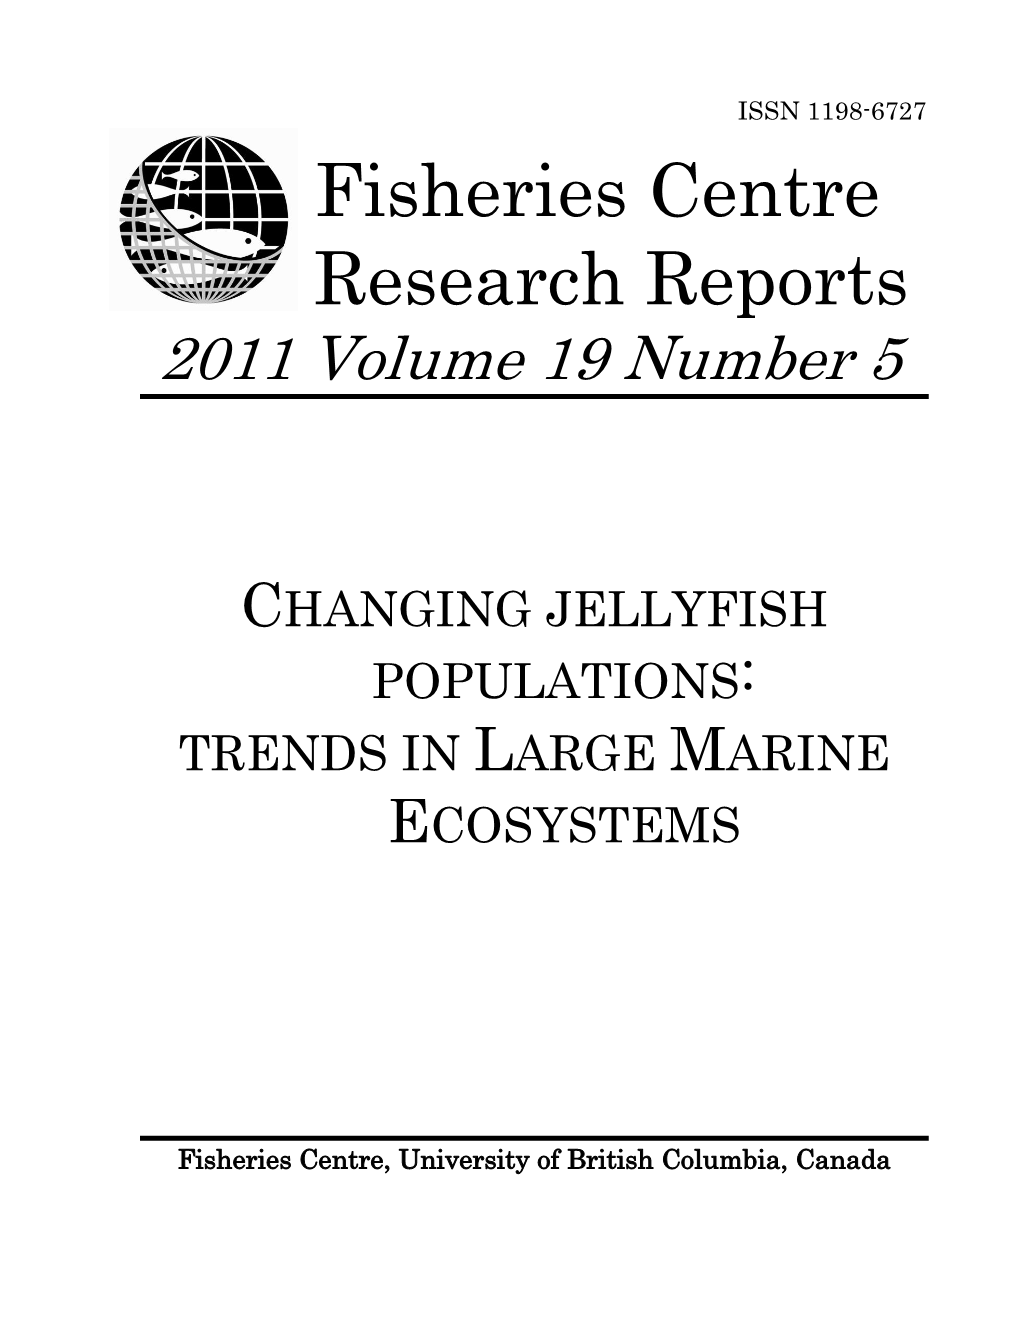 Fisheries Centre Research Reports 2011 Volume 19 Number 5